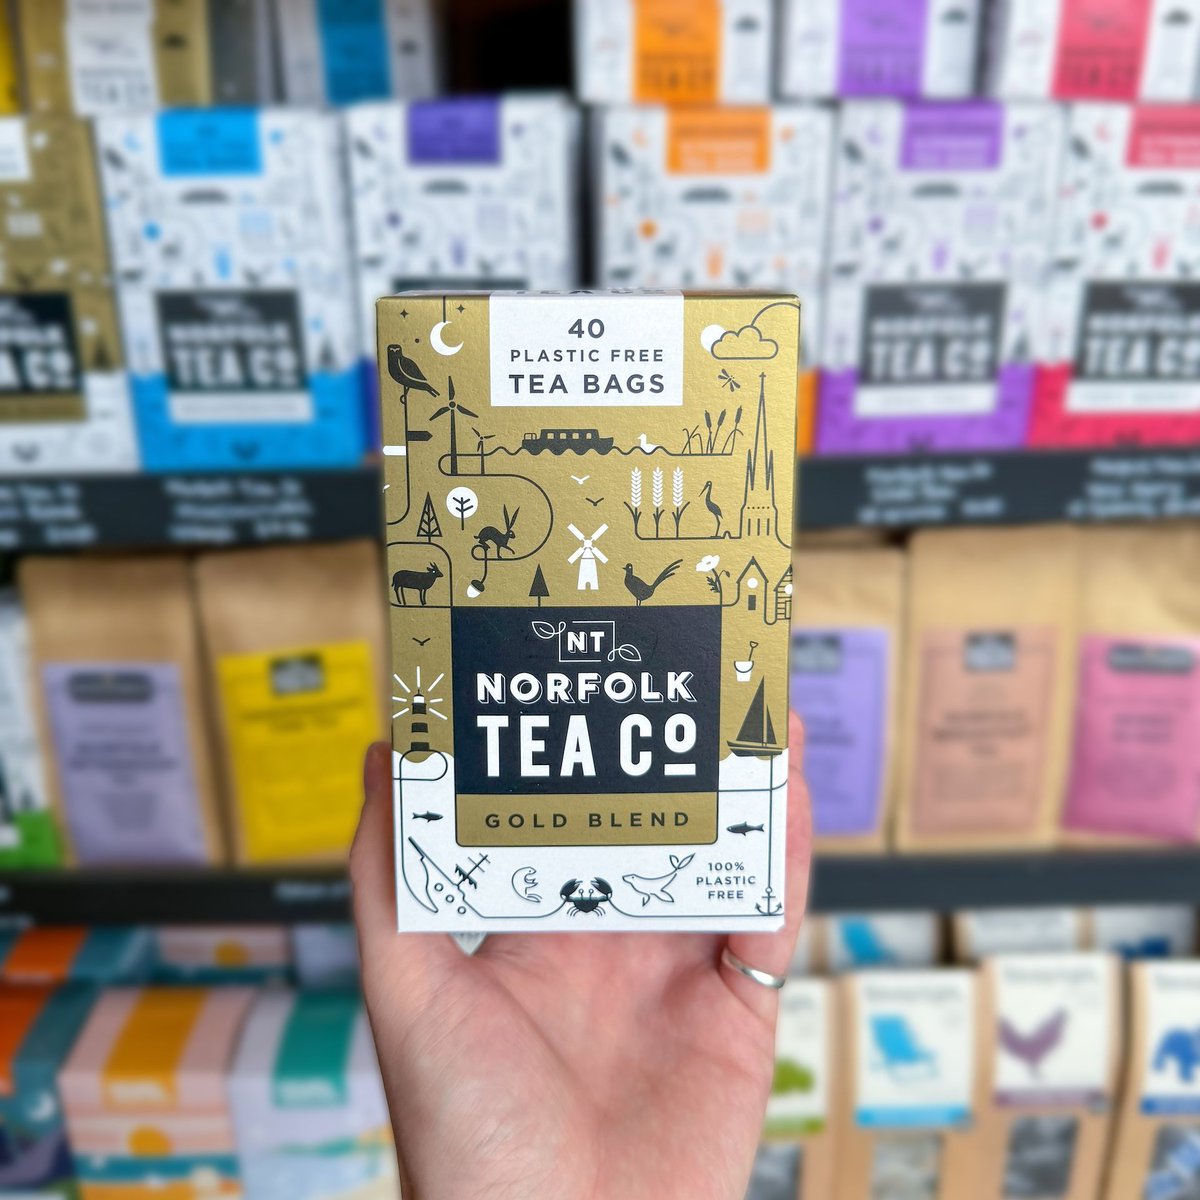 We have a brand new brew from the Norfolk Tea Co with their most luxurious blend yet! Made using the finest ingredients, Norfolk Tea Co's brand-new brew produces a rich, smooth, full-bodied flavour. Visit our farm shop to buy a proper Norfolk brew! #NorfolkTeaCo #NorfolkTea #Tea